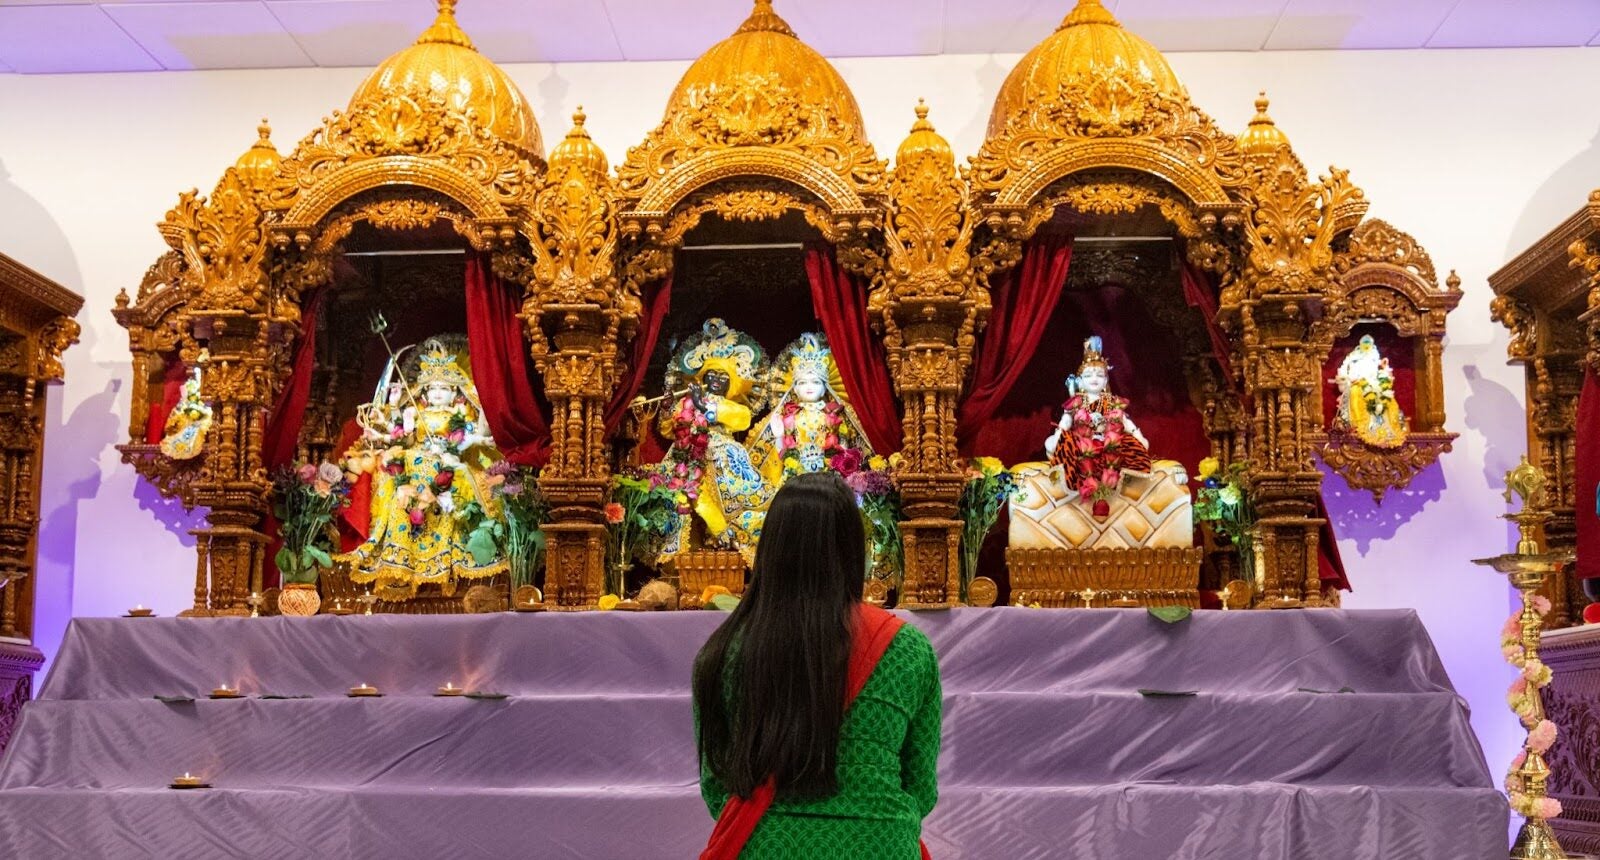 Woman sits wearing a green dress in front of an ornate gold shrine